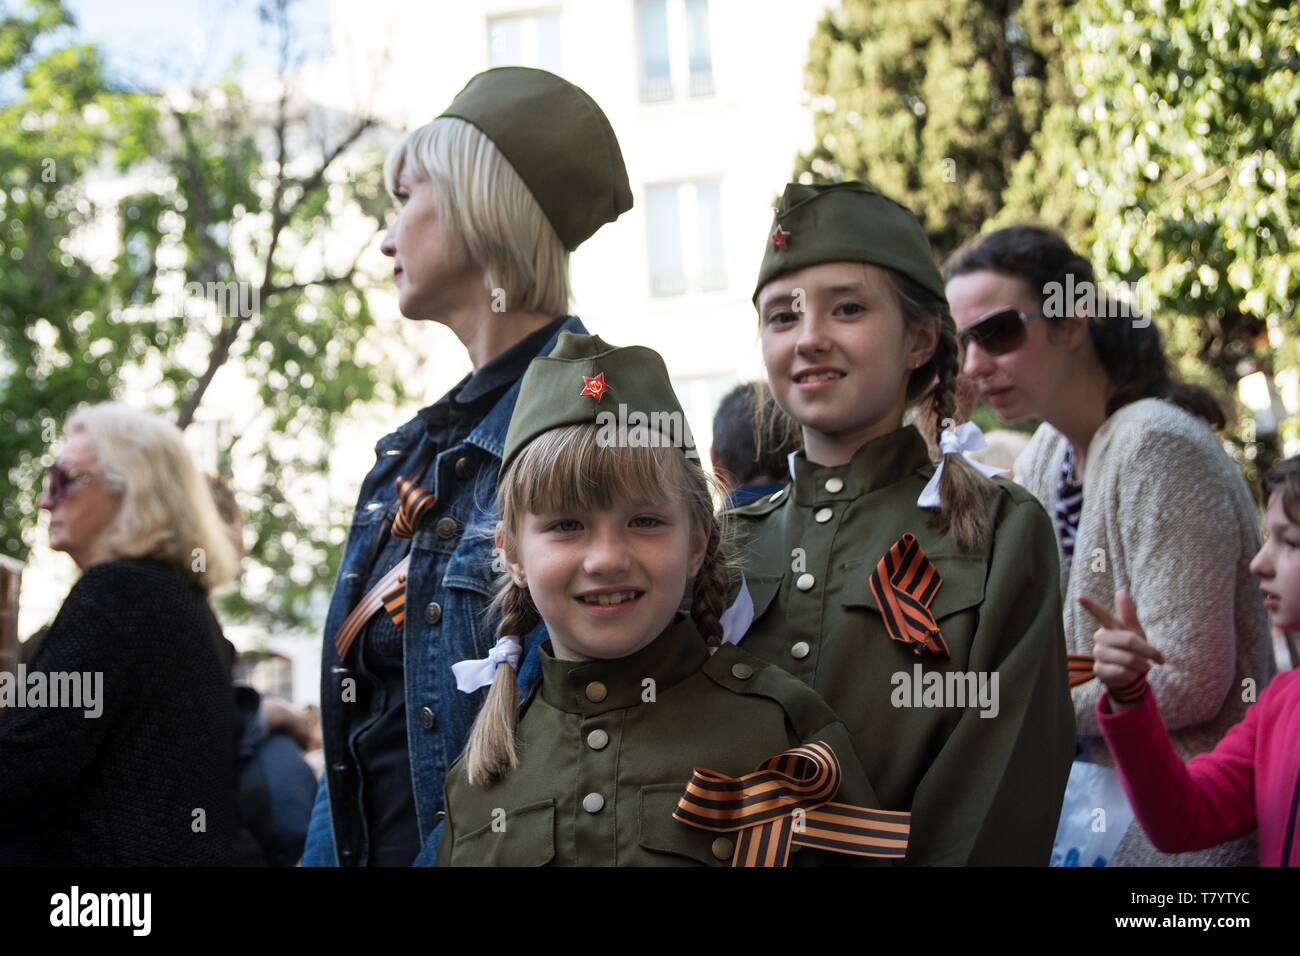 Kids seen wearing uniforms during the celebrations. Thousands of Russian citizens participated in the celebrations for the anniversary of the victory against fascism, which has been established as a Victory Day. With the military parade as well as the demonstration, the festive event took place across Russia, with citizens holding photos of their relatives who have either fought or been killed during the World War. Stock Photo